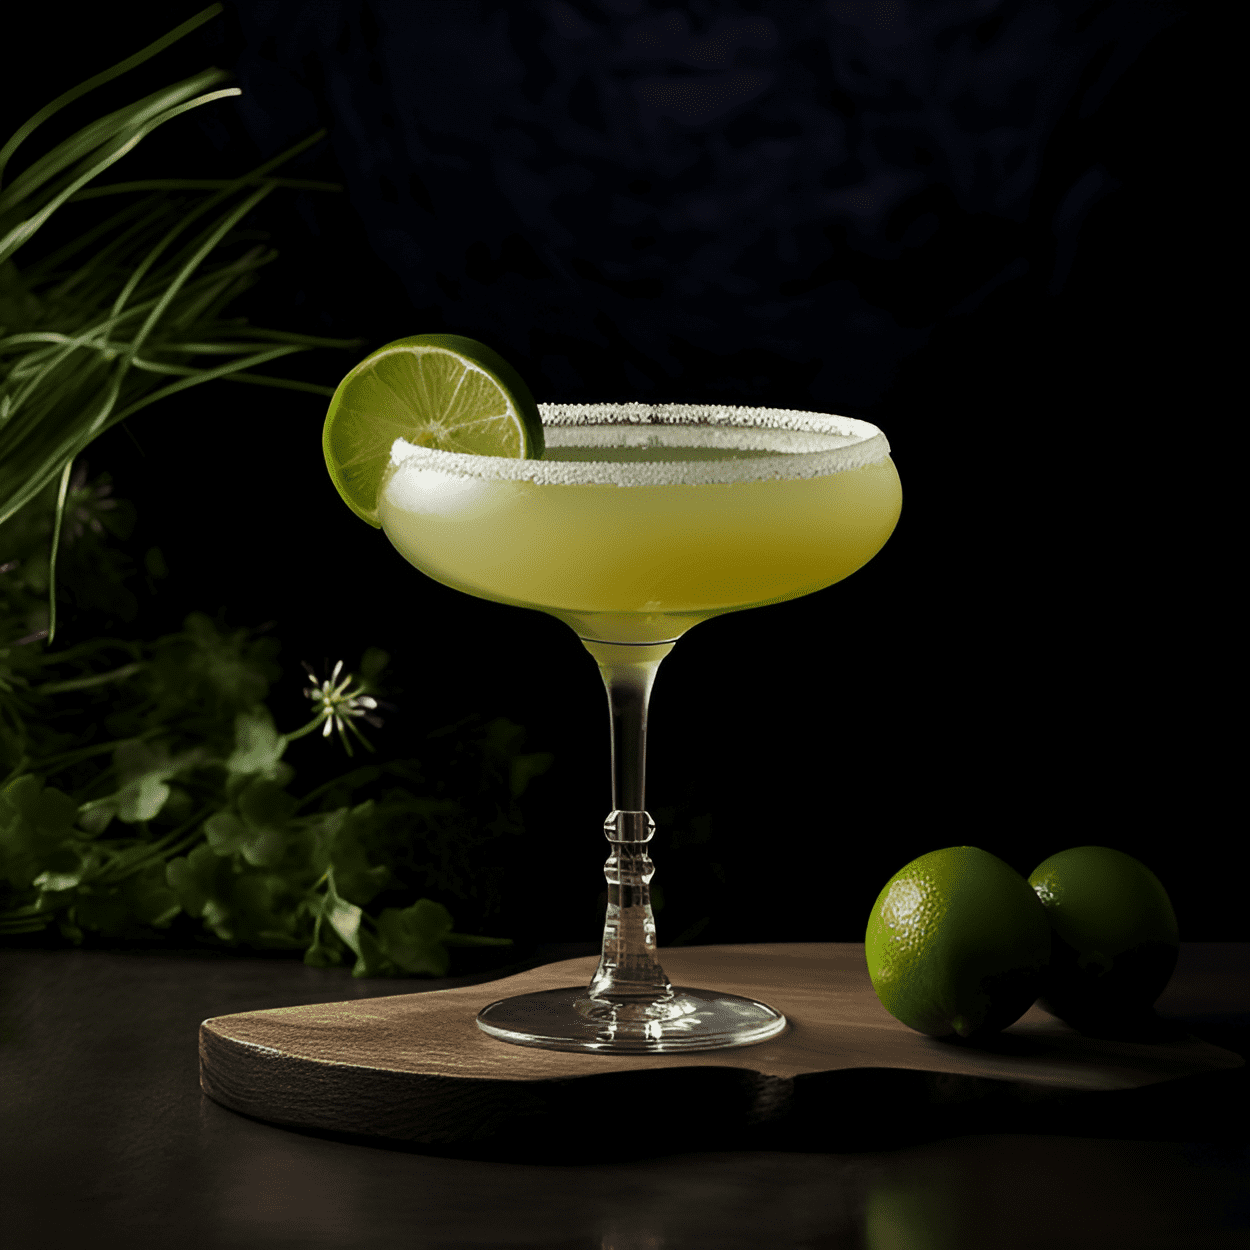 Ginger Daiquiri Cocktail Recipe - The Ginger Daiquiri is a vibrant cocktail with a strong, spicy kick from the ginger. It's balanced by the tartness of the lime and the sweetness of the sugar, creating a complex, layered flavor profile that is both refreshing and invigorating.